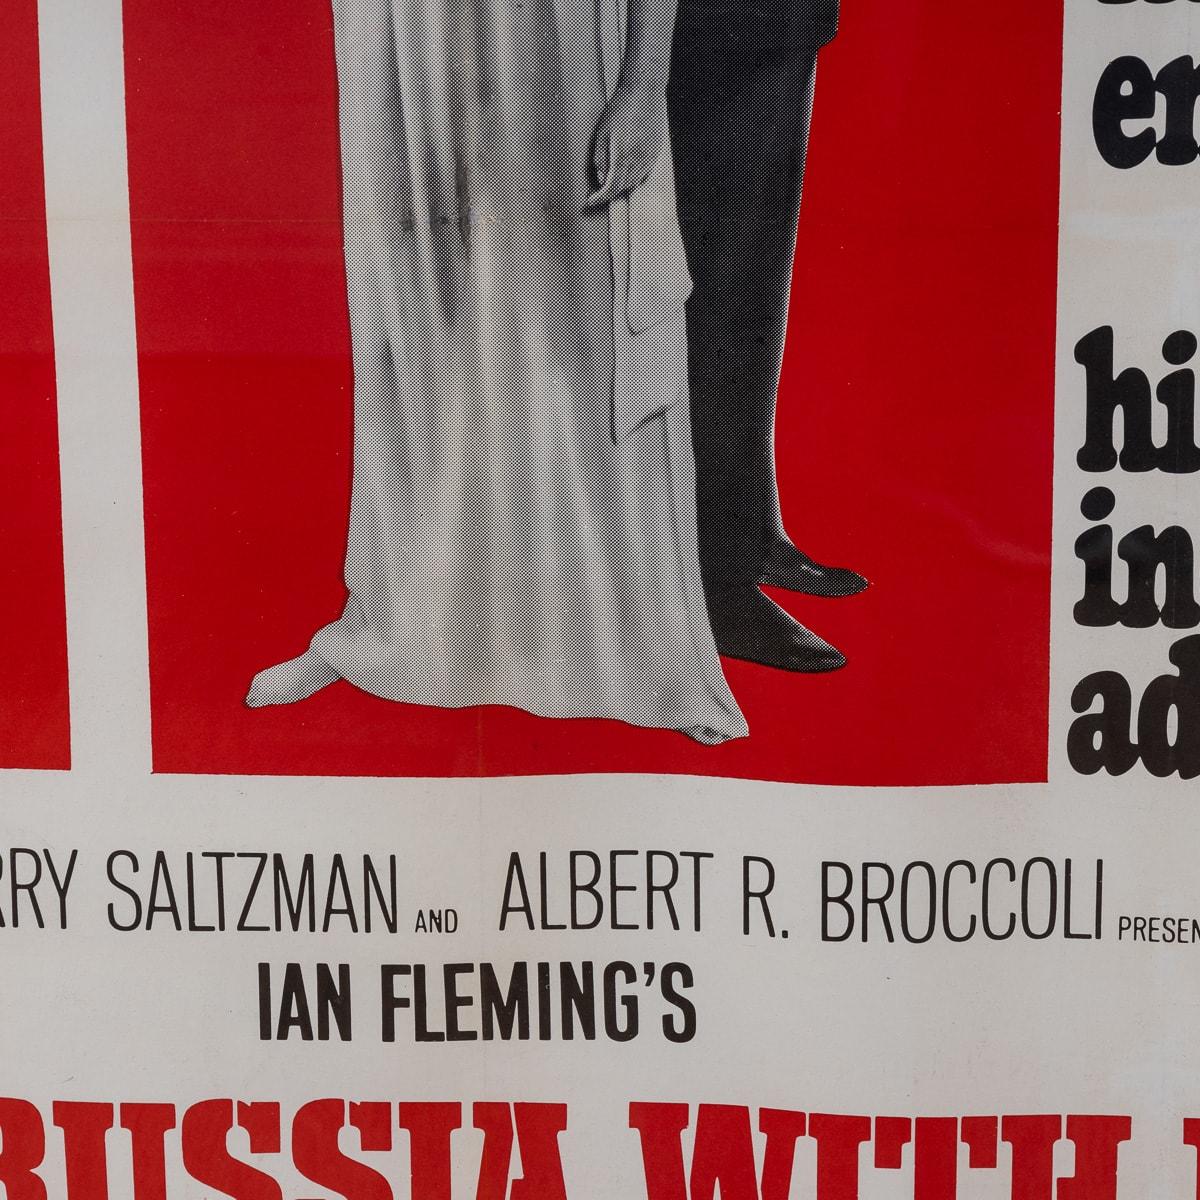 Original American (U.S) Release James Bond 'From Russia With Love' Poster c.1963 For Sale 9